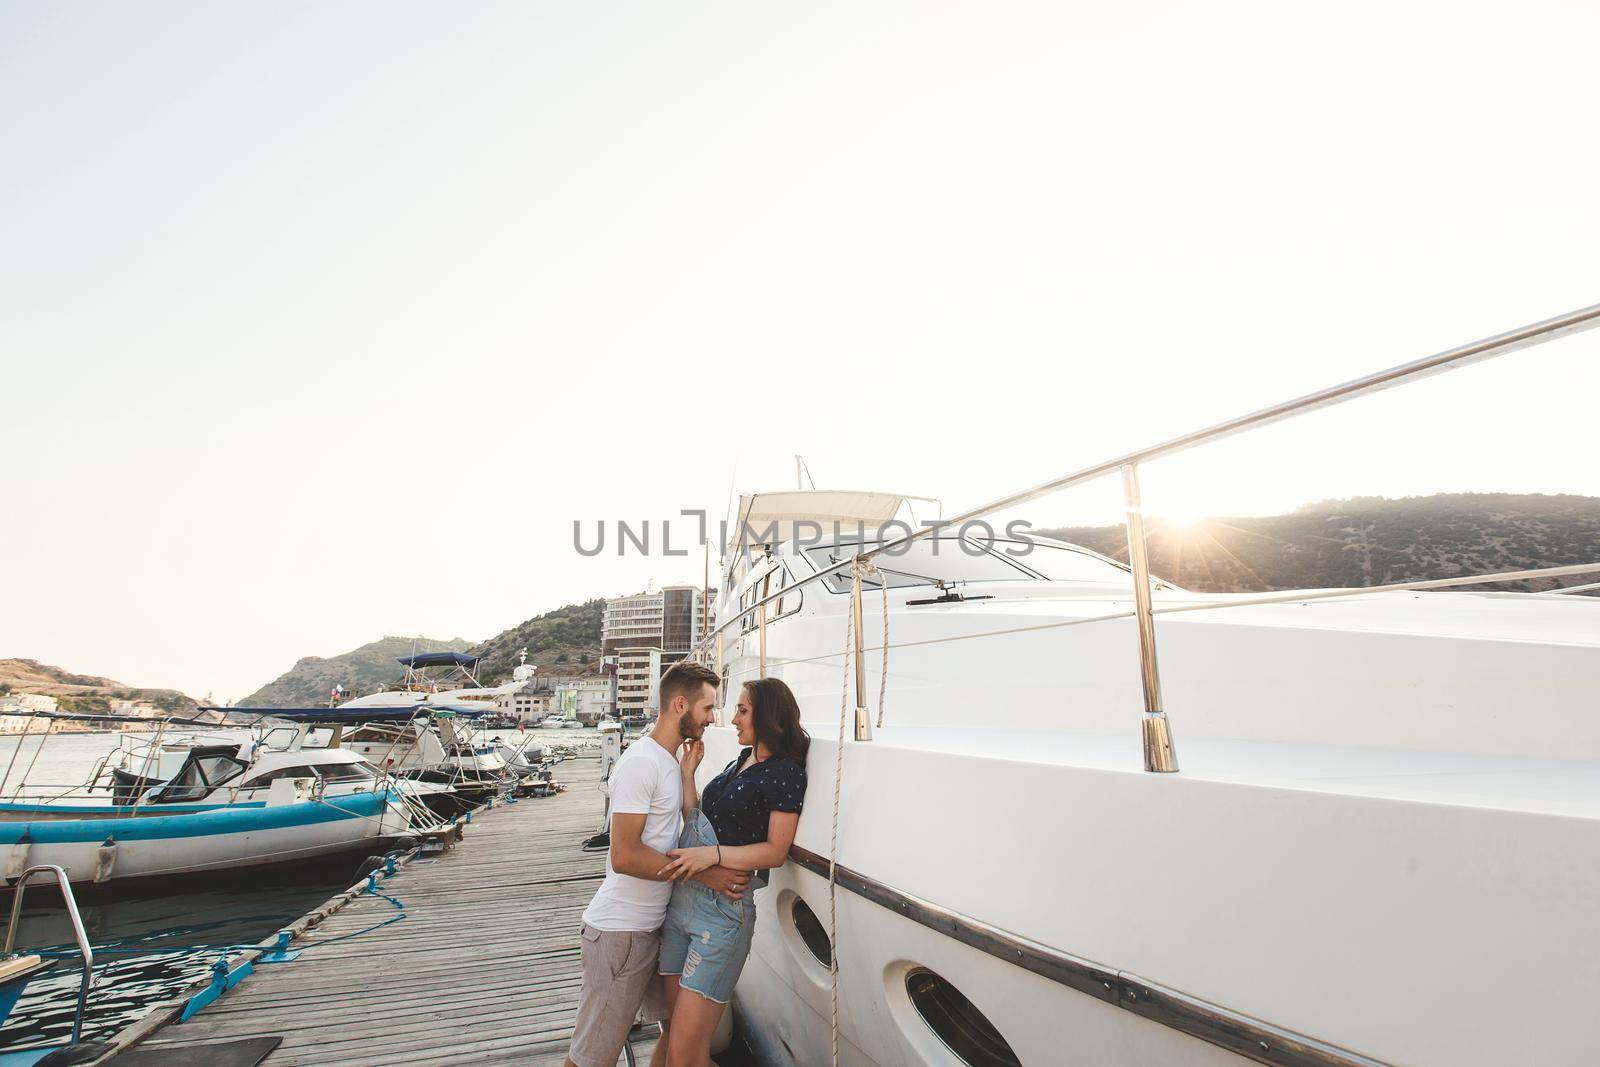 Boy and girl, walk and dance on the pier on the background of yachts and boats